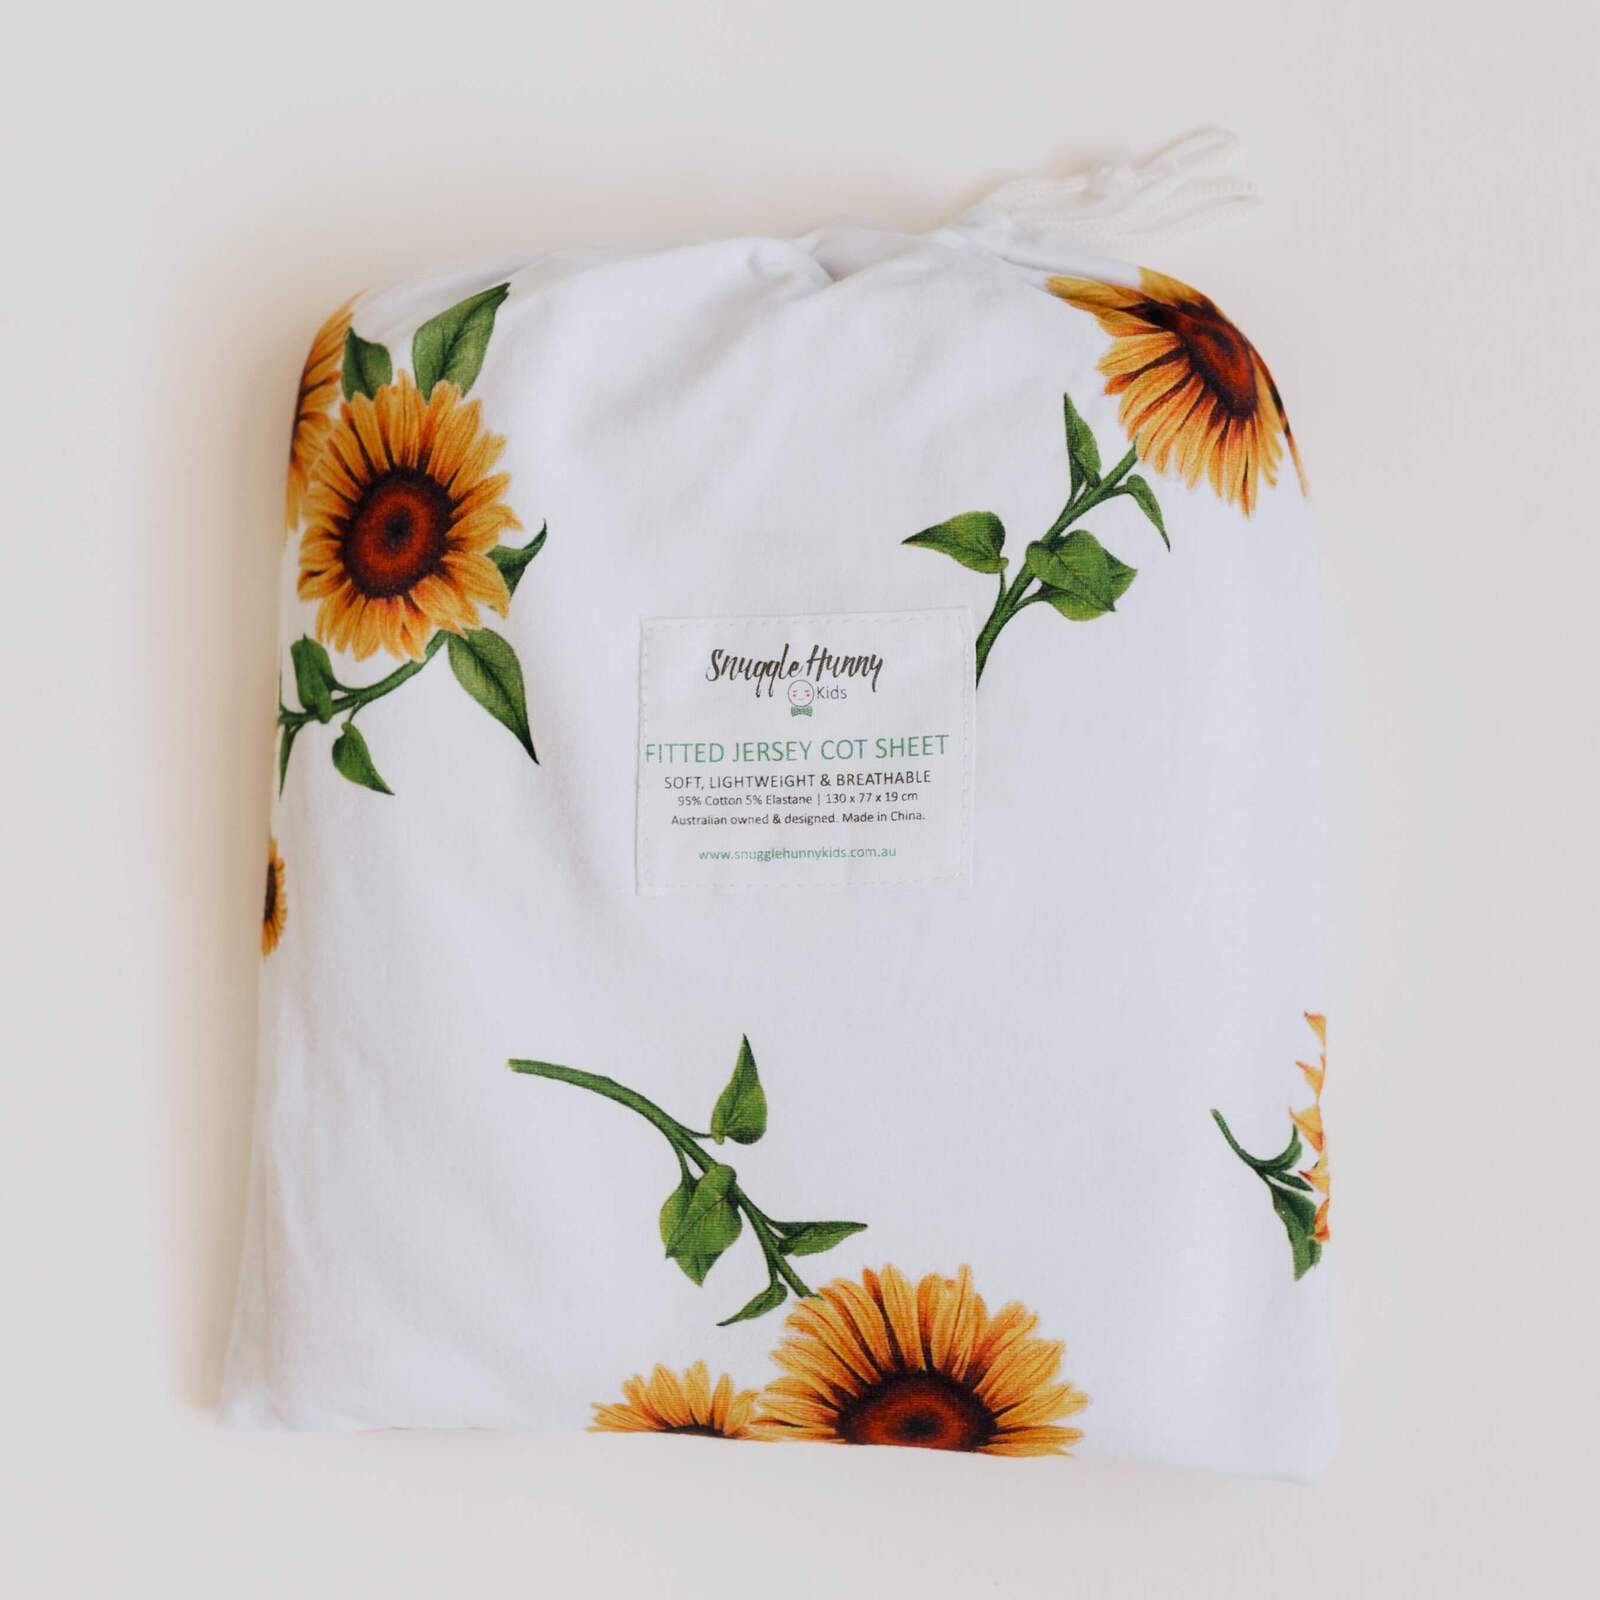 Snuggle Hunny Kids Linen Sheets Sunflower Snuggle Hunny Organic Fitted Cot Sheet